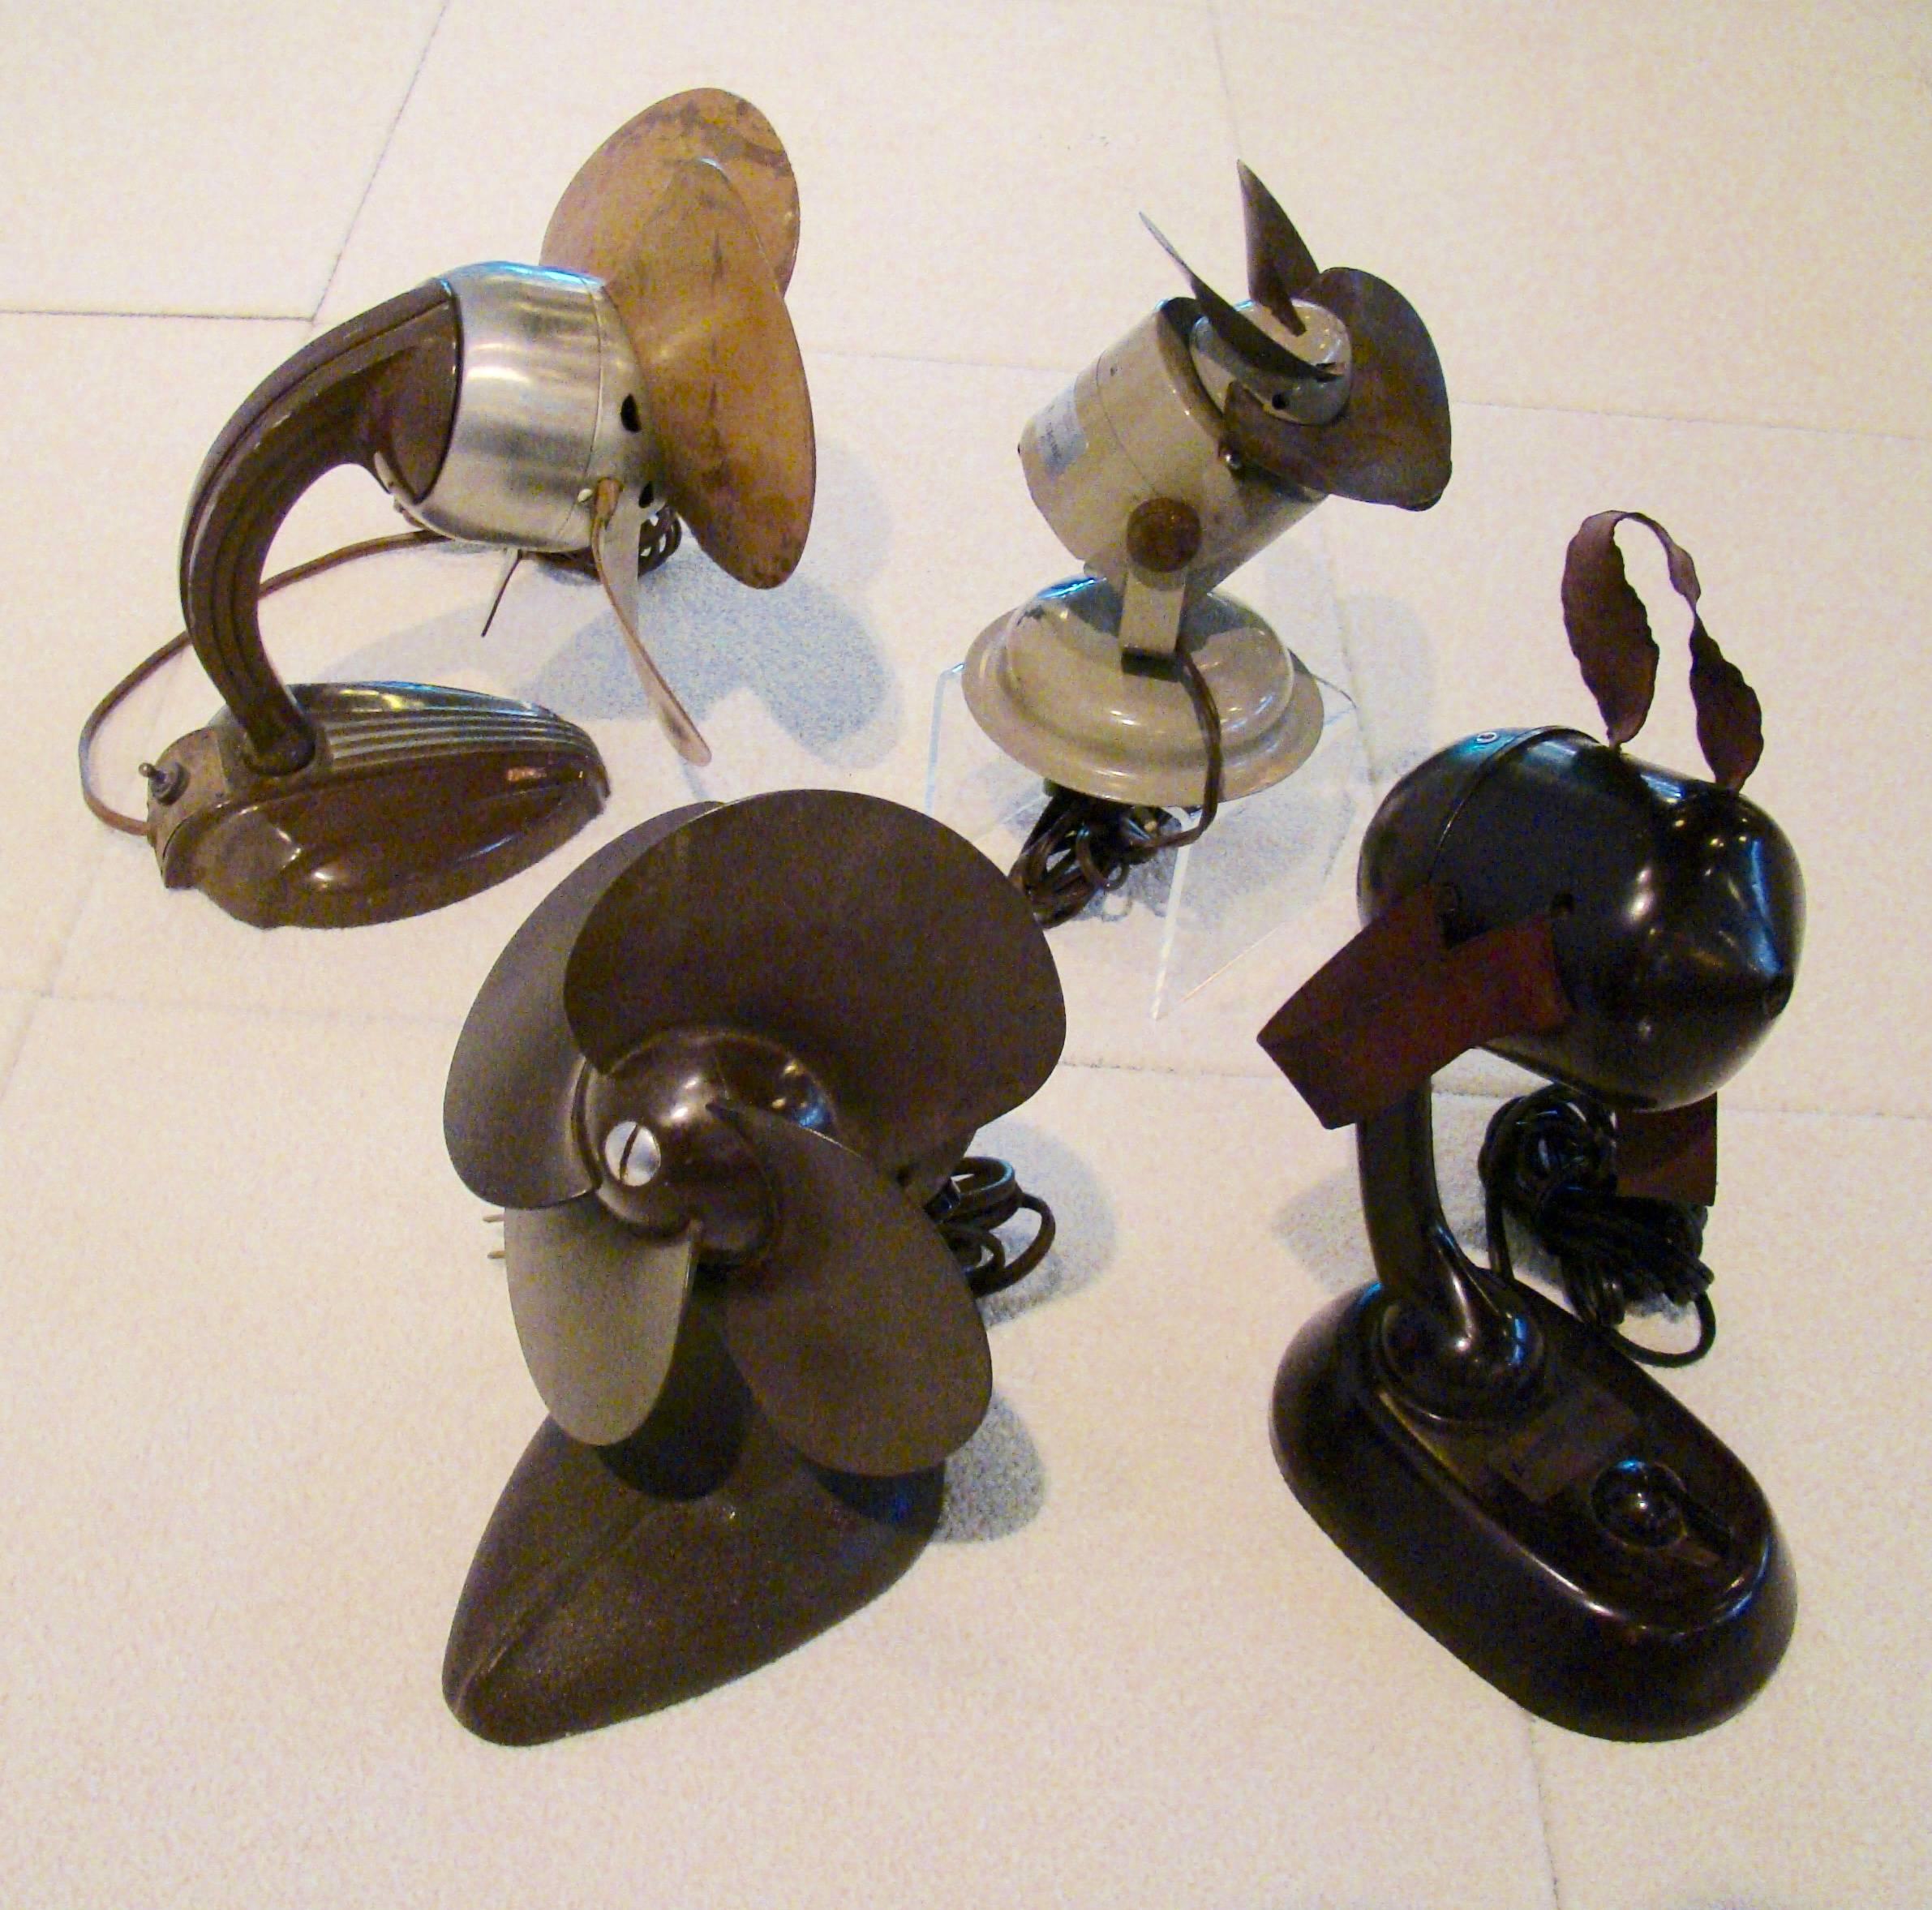 Instant collection of four outstanding and unique tabletop fans from the Art Deco era. From left to right are the descriptions and dimensions:
Airflow fan with bakelite base and upholstery blades 10.5